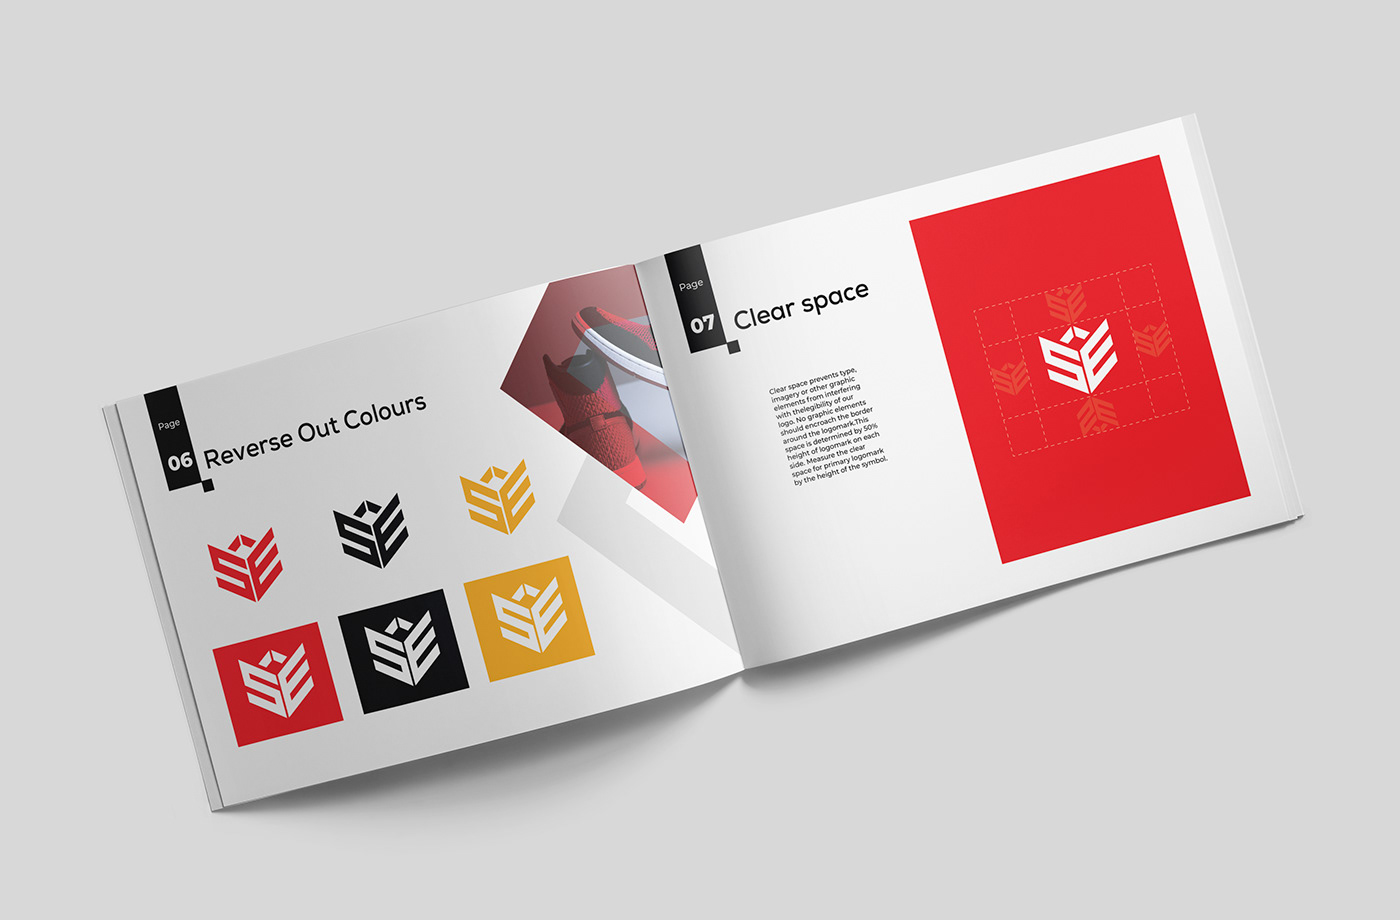 brand identity brand style guidelines guideline Identity Guideline logo branding Style Guide